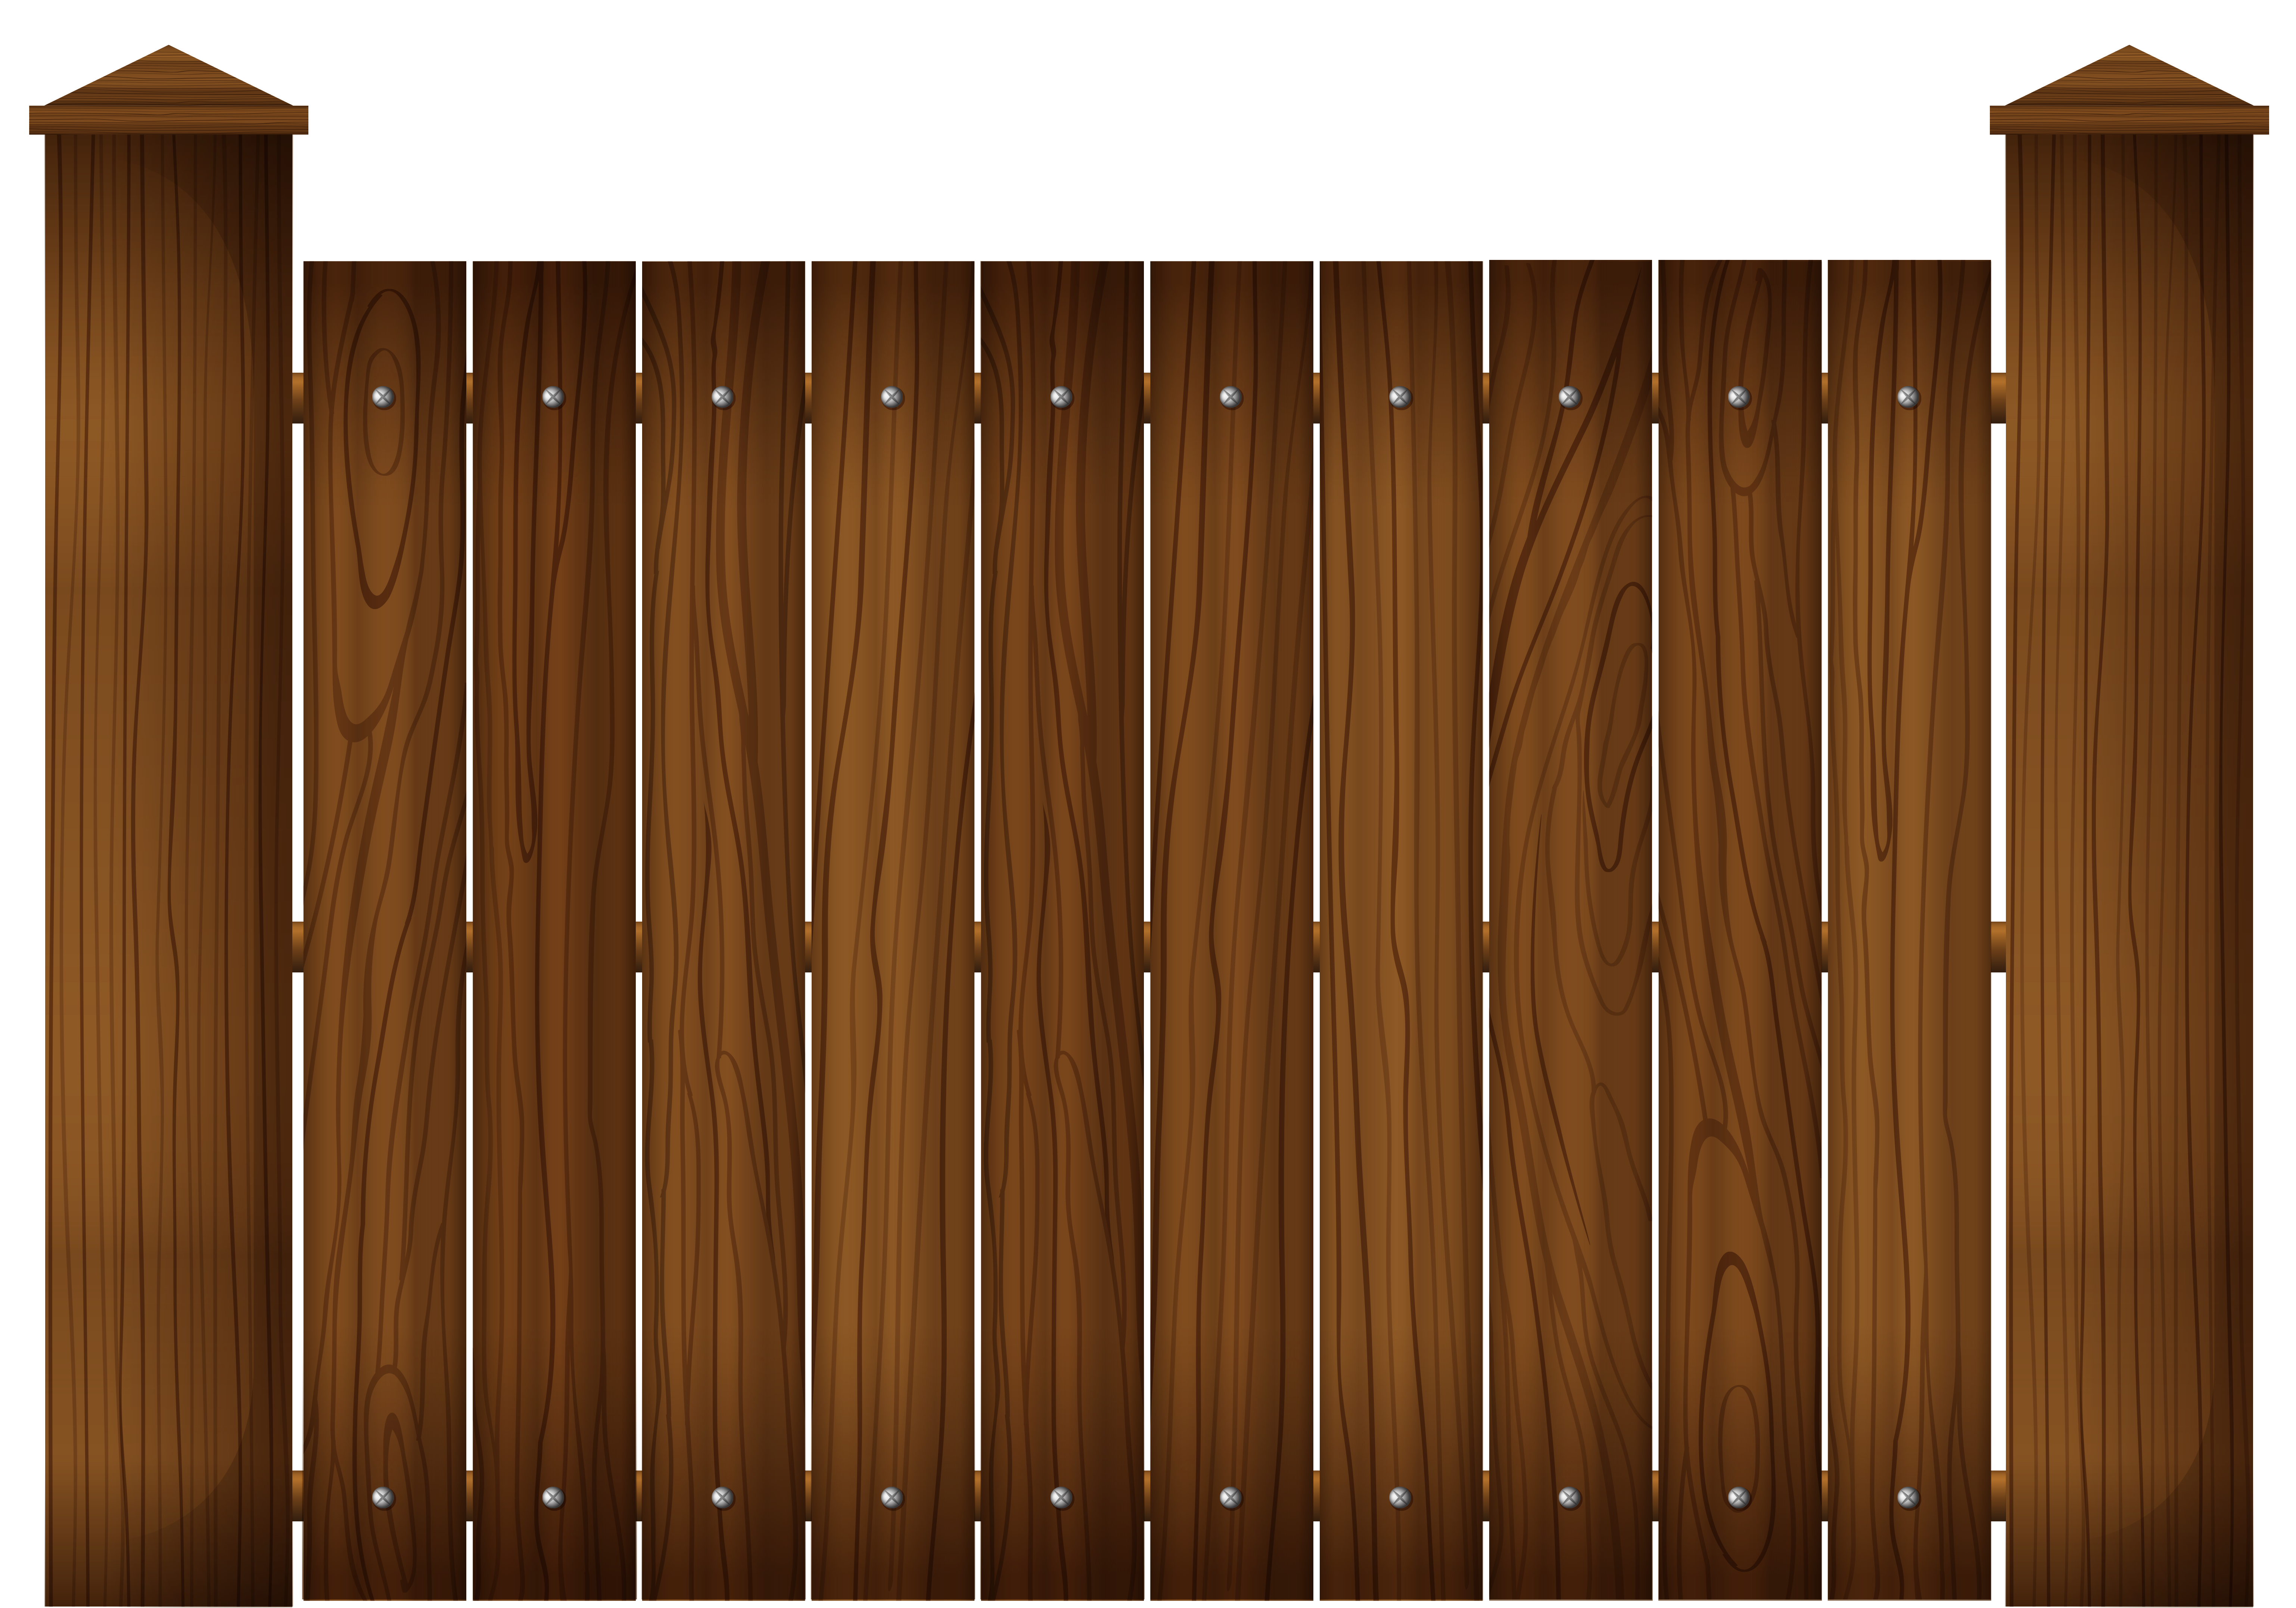 Wooden_Fence_Clipart_Picture.png?m=1429546993 